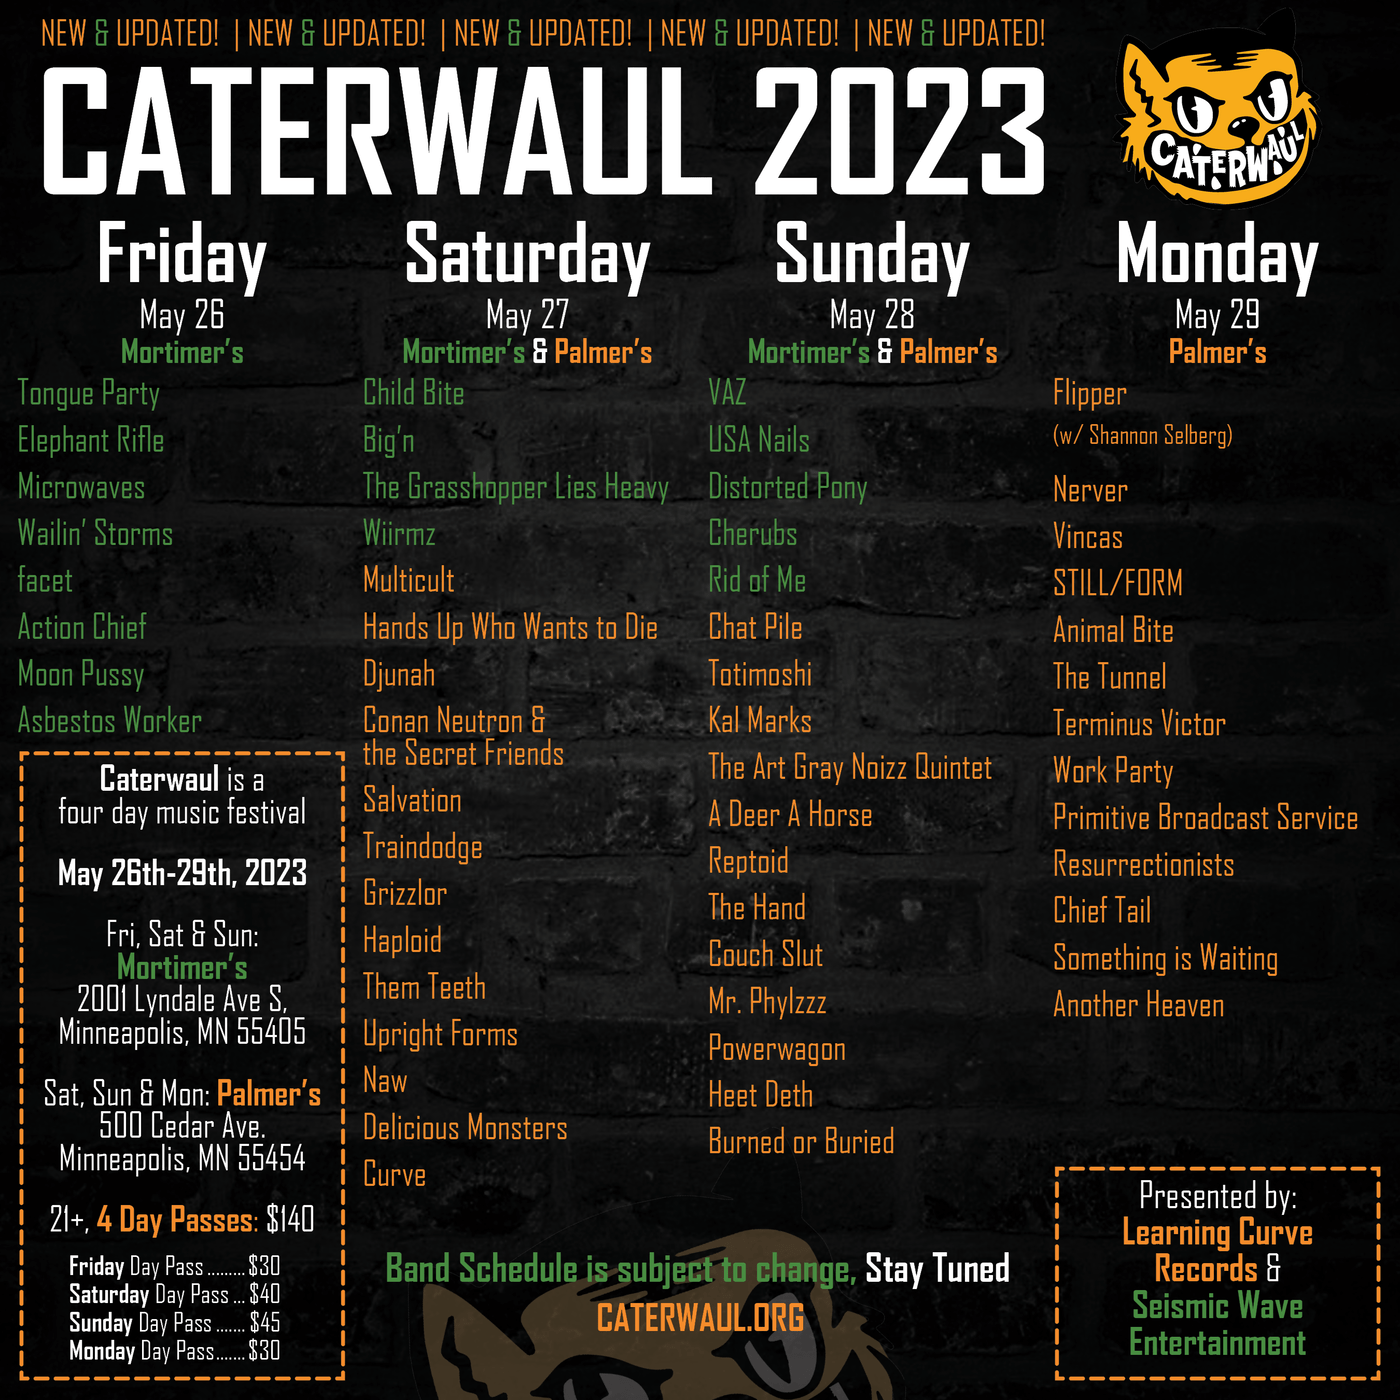 Caterwaul new lineup